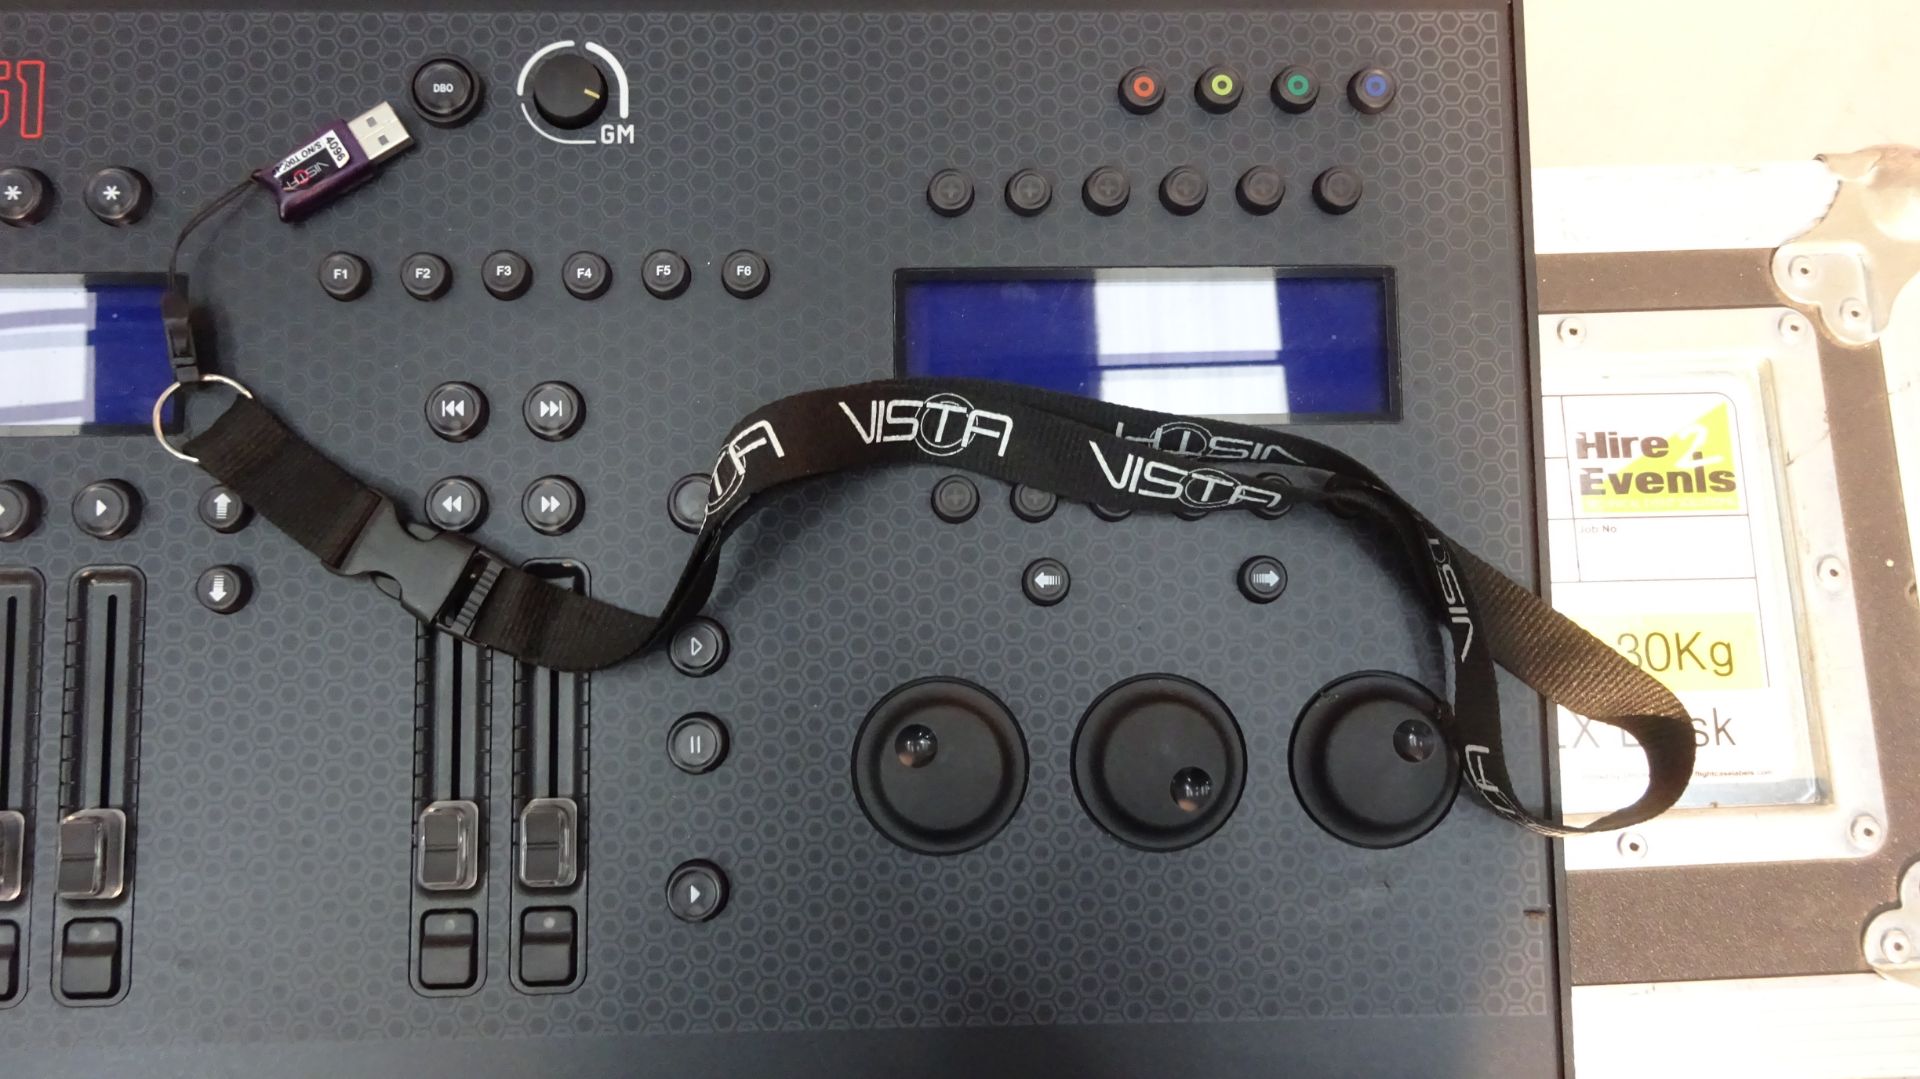 Jansvista S1 Lighting Desk 2 x 5 pin DMX Outputs Jansvista Software Dongal to control moving - Image 3 of 12